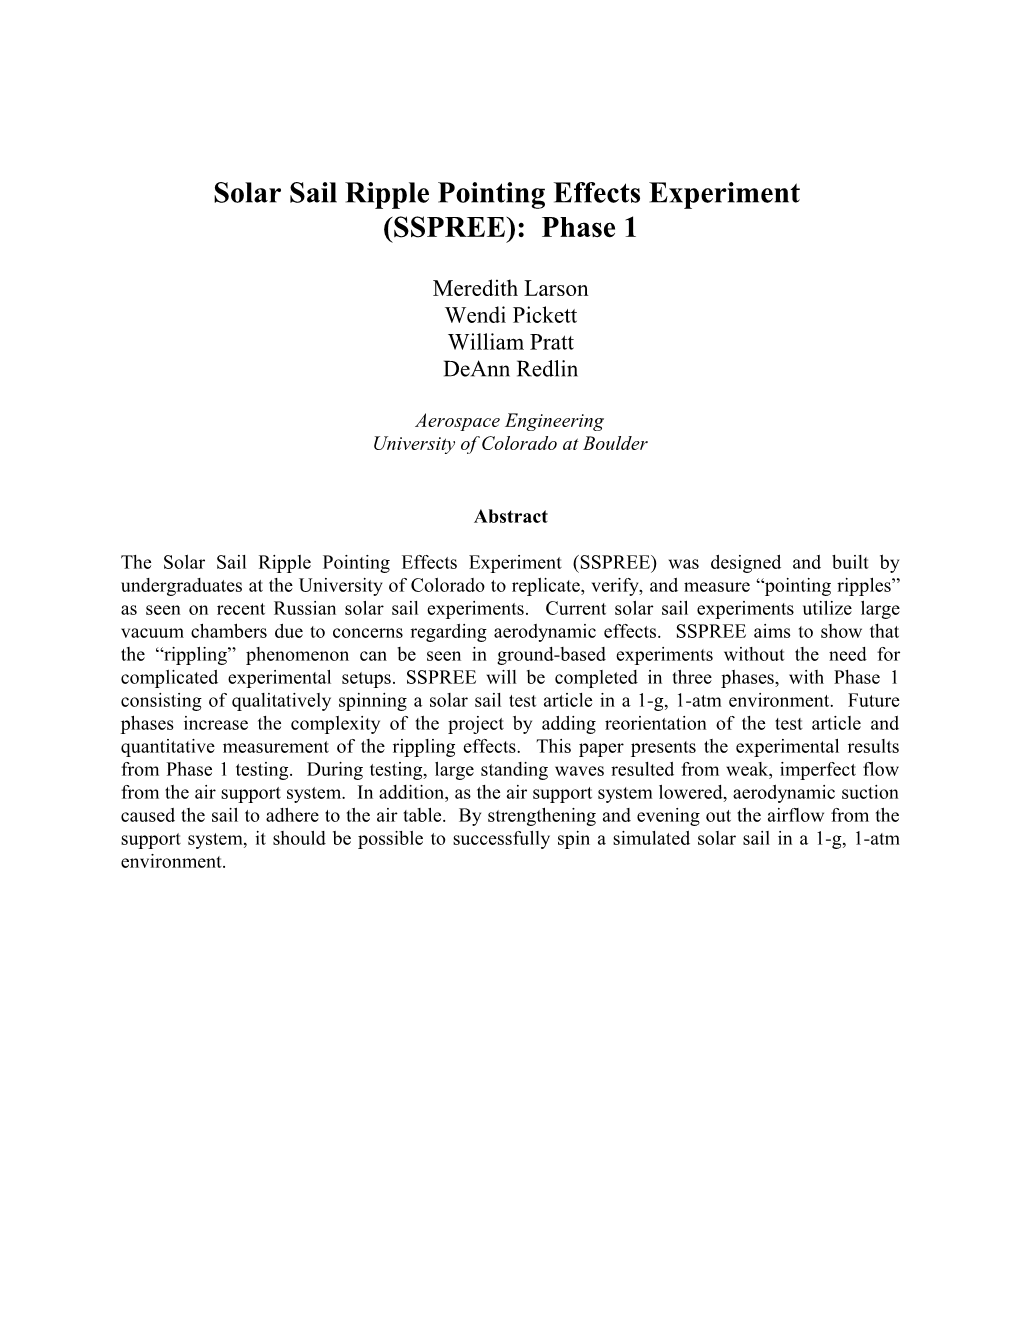 Solar Sail Ripple Pointing Effects Experiment (SSPREE)